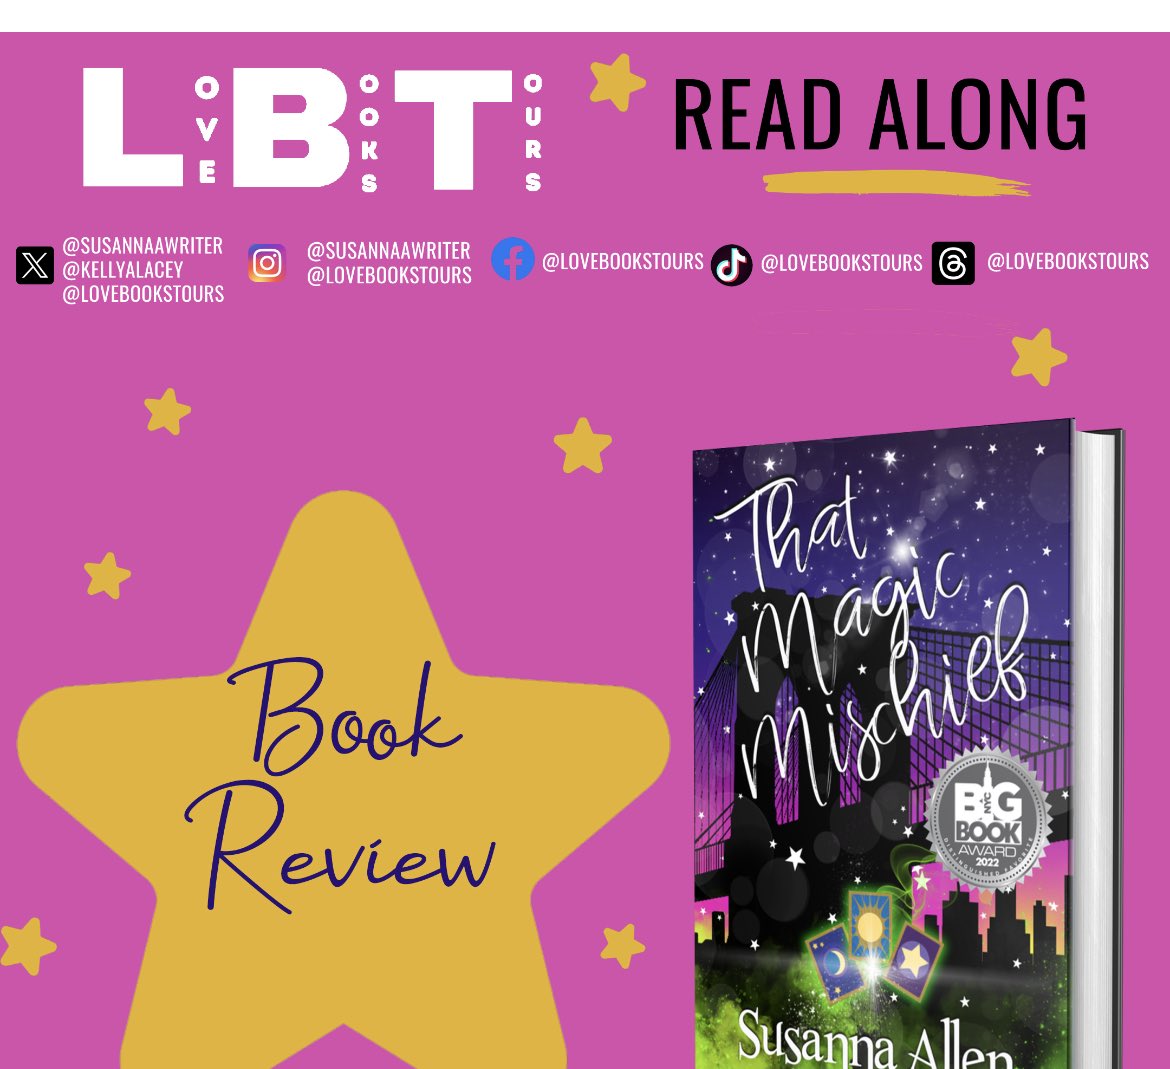 Tea leaves and Book leaves: That Magic Mischief by Susanna Allen tealeavesandbookleaves.blogspot.com/2023/11/that-m… Thank you @SusannaAWriter @KellyALacey @lovebookstours #Ad #LBTCrew #Freebookreview #giftedbook for letting me be part of this readalong. Loved this book